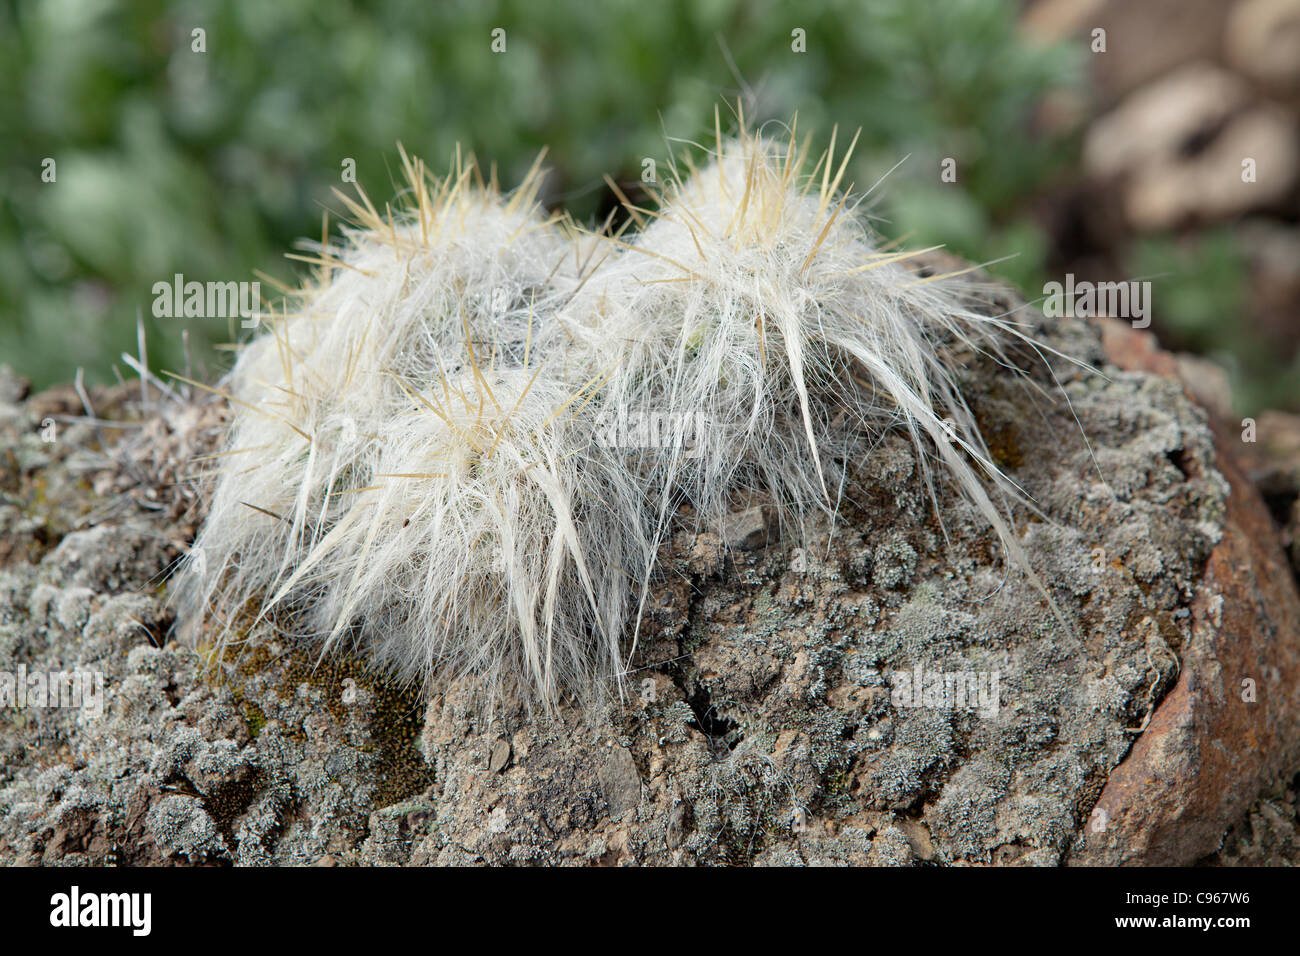 Cactus planted on potatoe field fence in Pampallaqta village, Andes mountains, Peru. Stock Photo